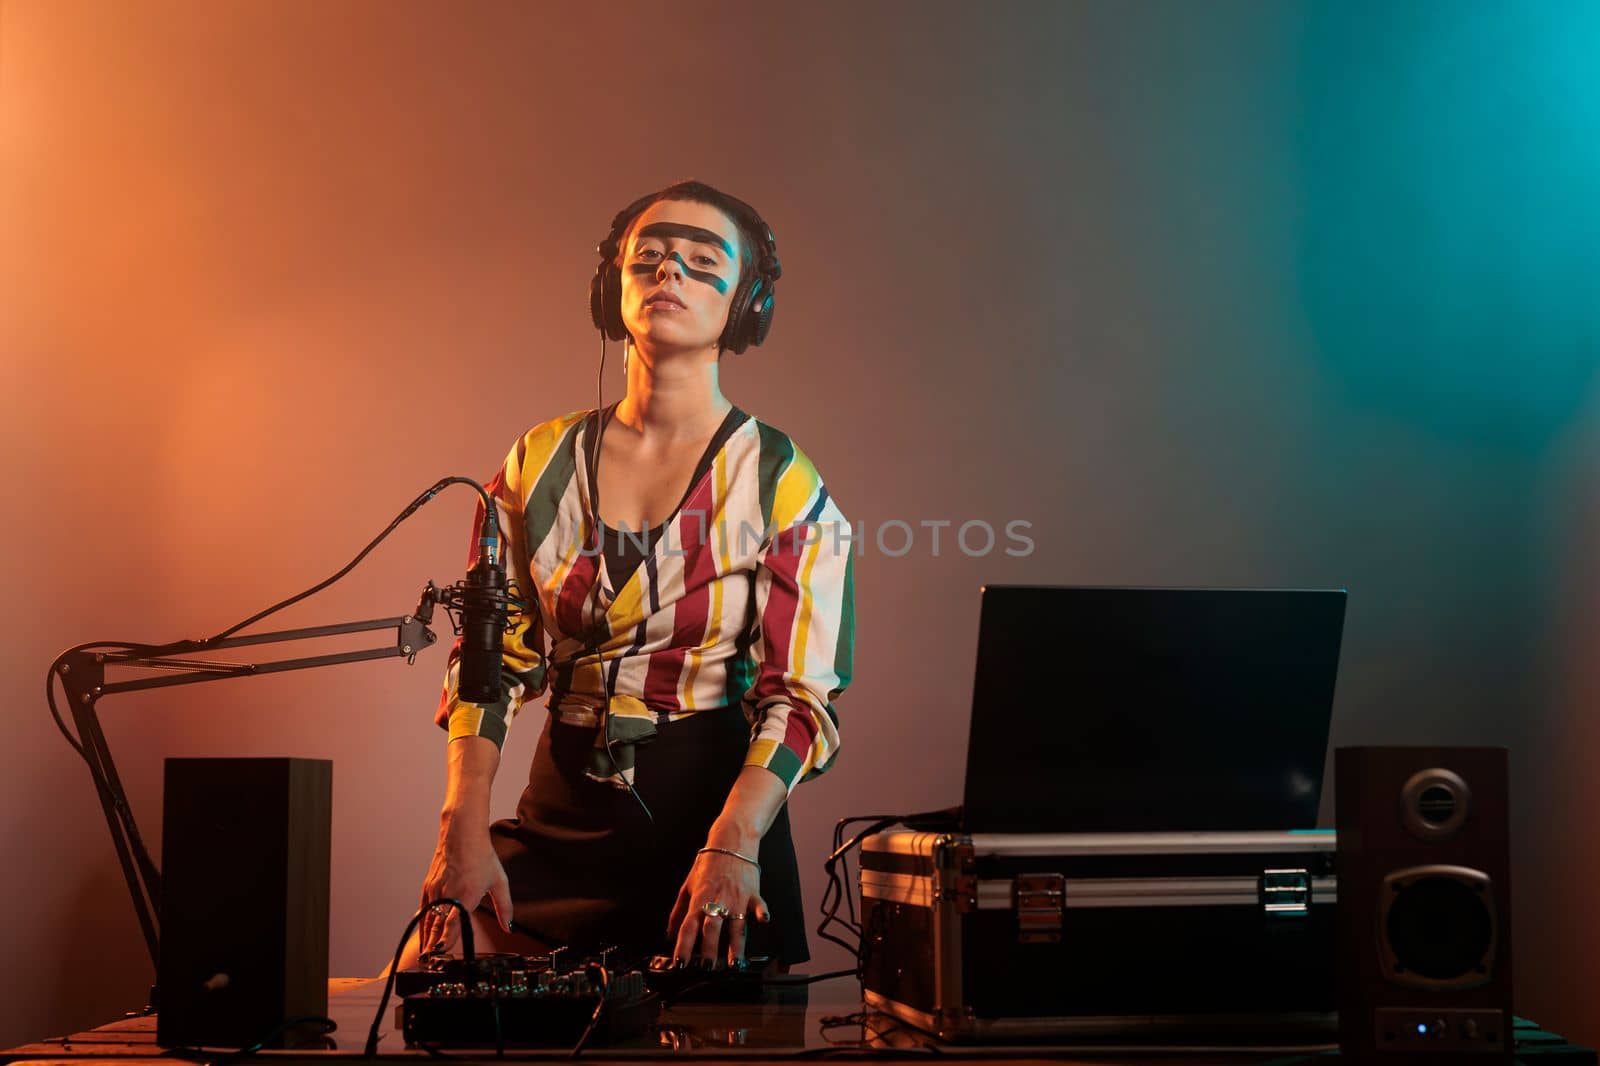 Cheerful musical artist working as dj with turntables, mixing techno music with bass and audio equipment. DJ woman playing songs at mixer, standing over colorful background with smoke.